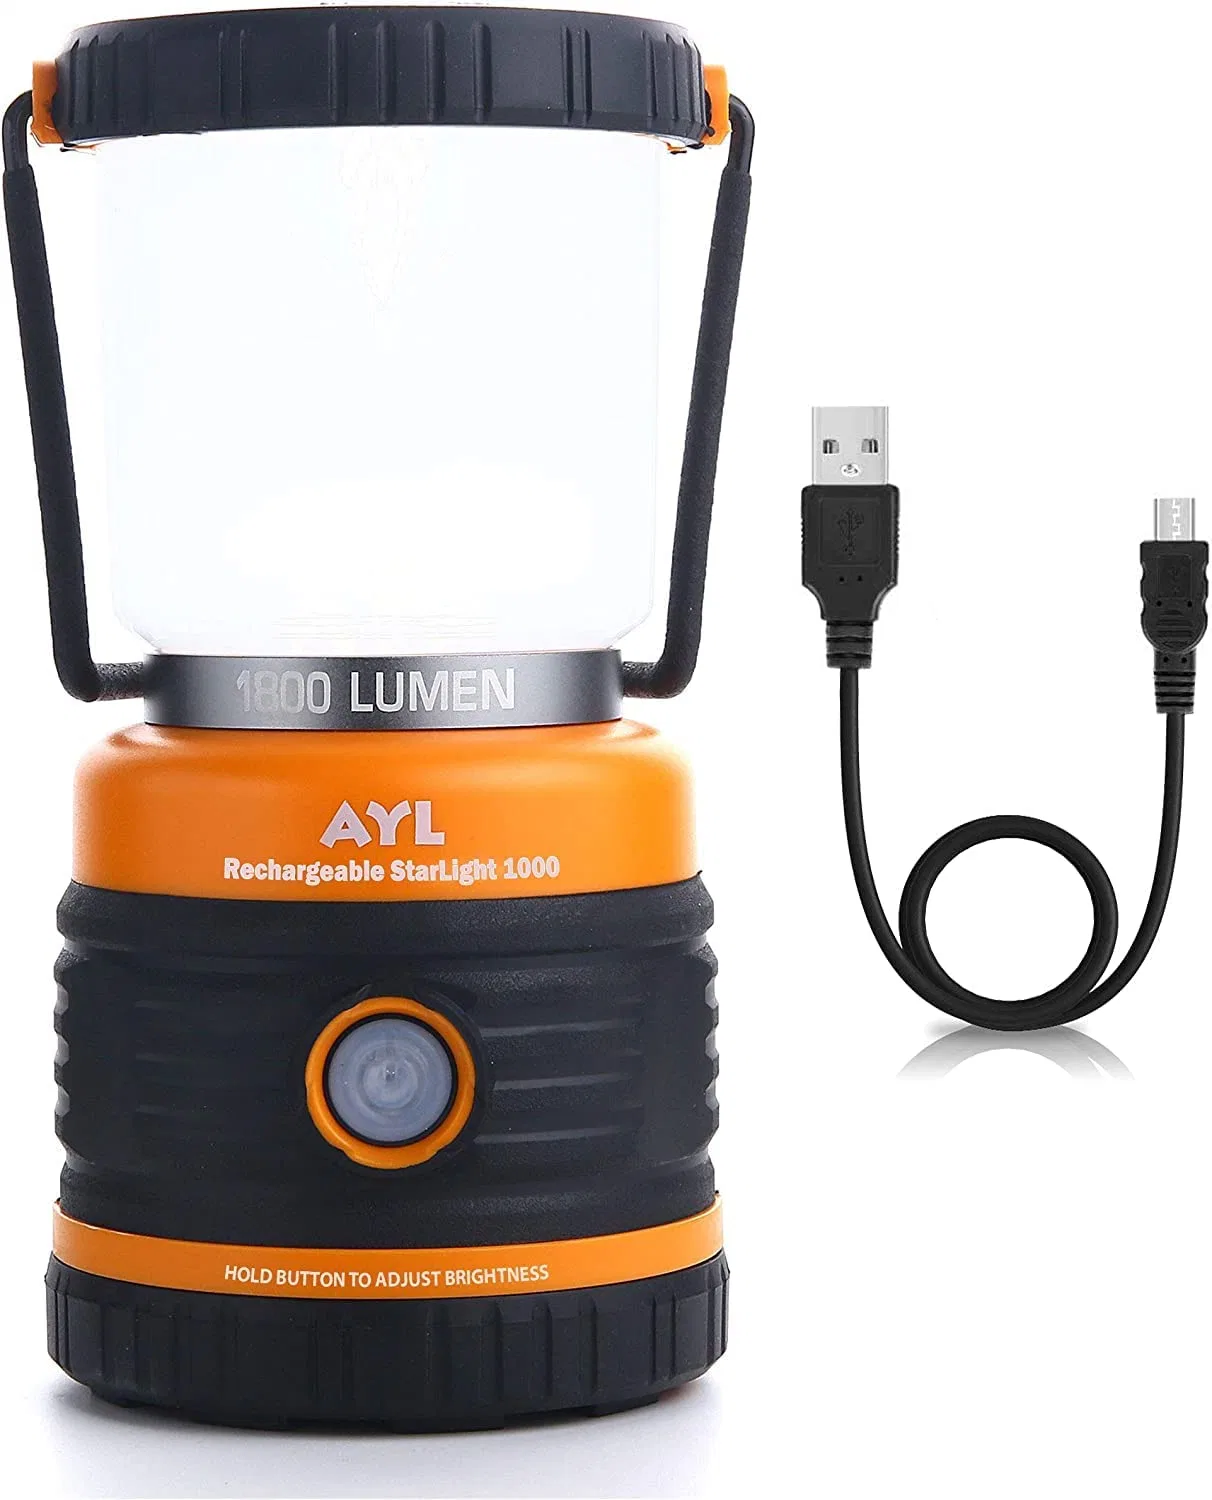 Rechargeable LED Outdoor Lamp with USB IP44 Waterproof Perfect Lantern Flashlight Camping LED Light for Emergency